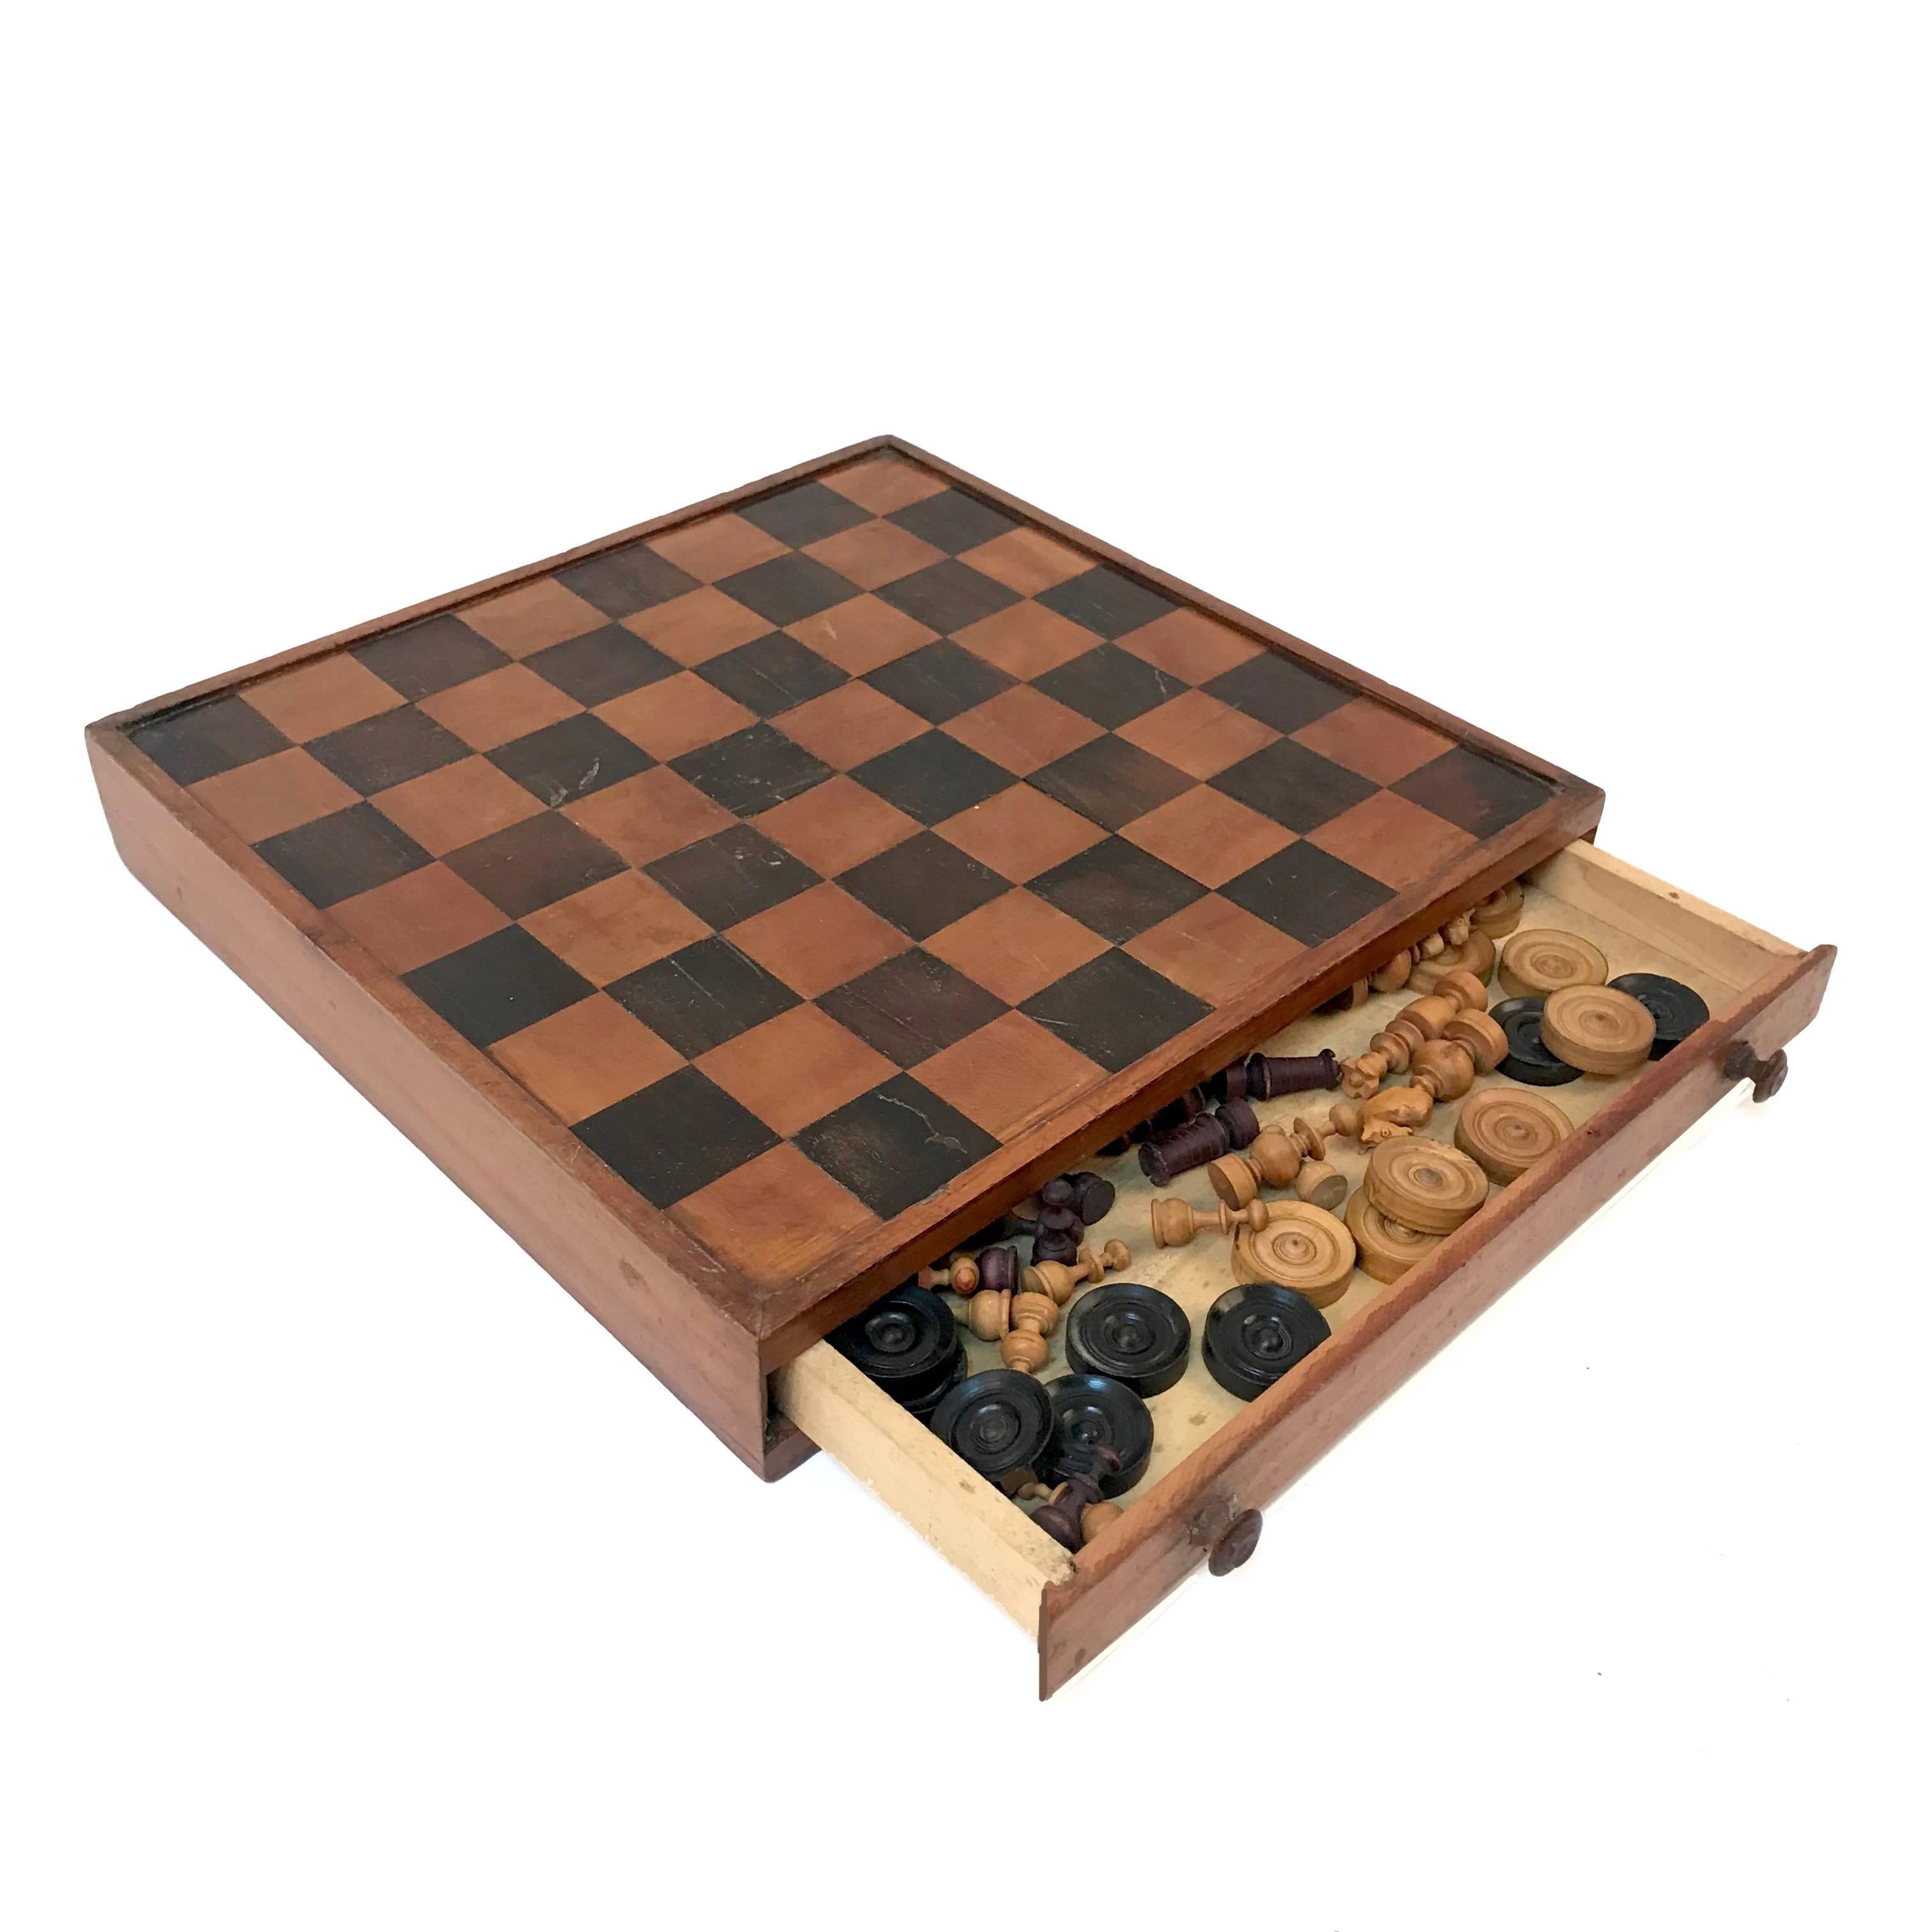 Antique Chessboard Inlaid Inlay Chess or Checker Game 19th Century Checkerboard 1